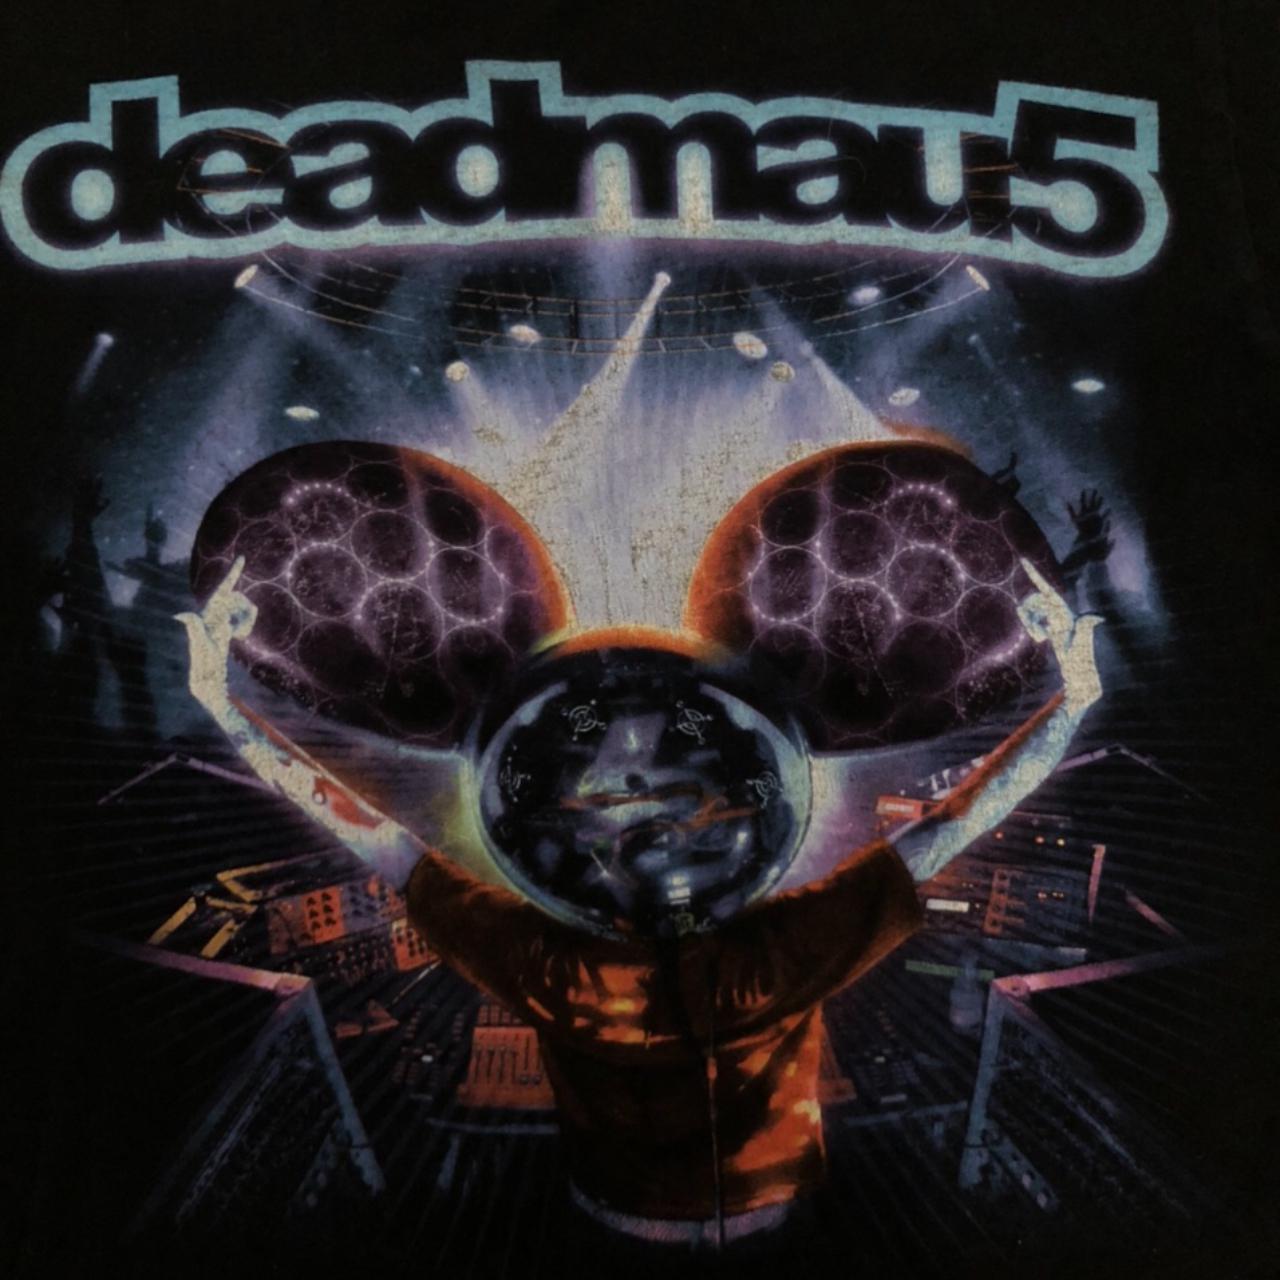 Product Image 2 - deadmau5 T-shirt 

•Size Small

•Measurements: laying